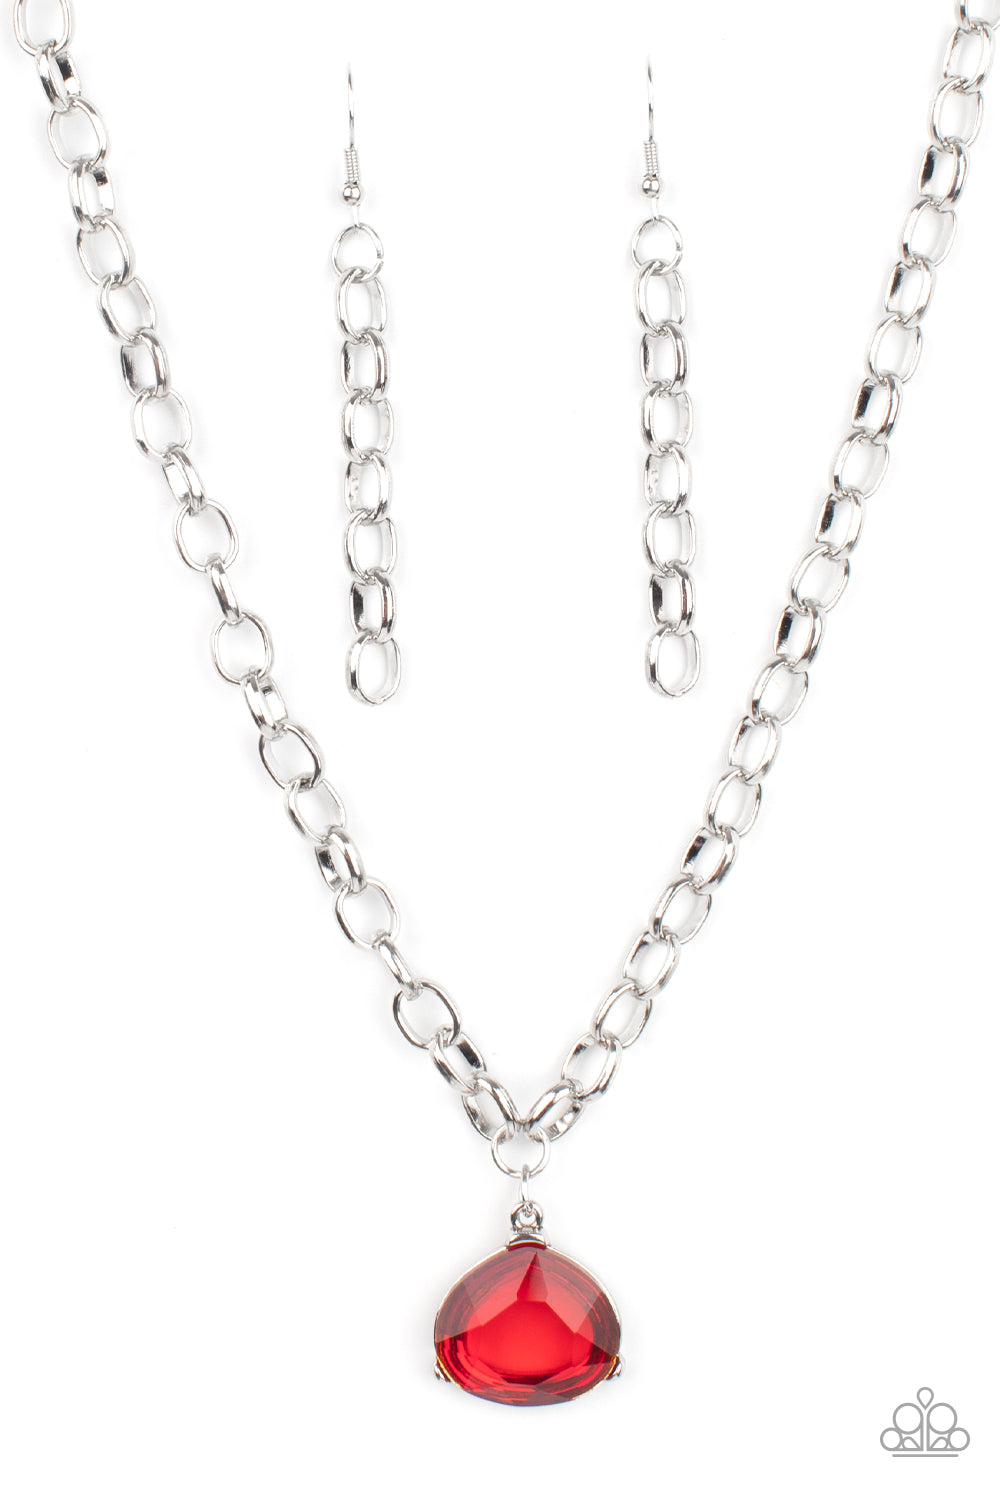 Paparazzi Gallery Gem - Red Necklace - A Finishing Touch Jewelry